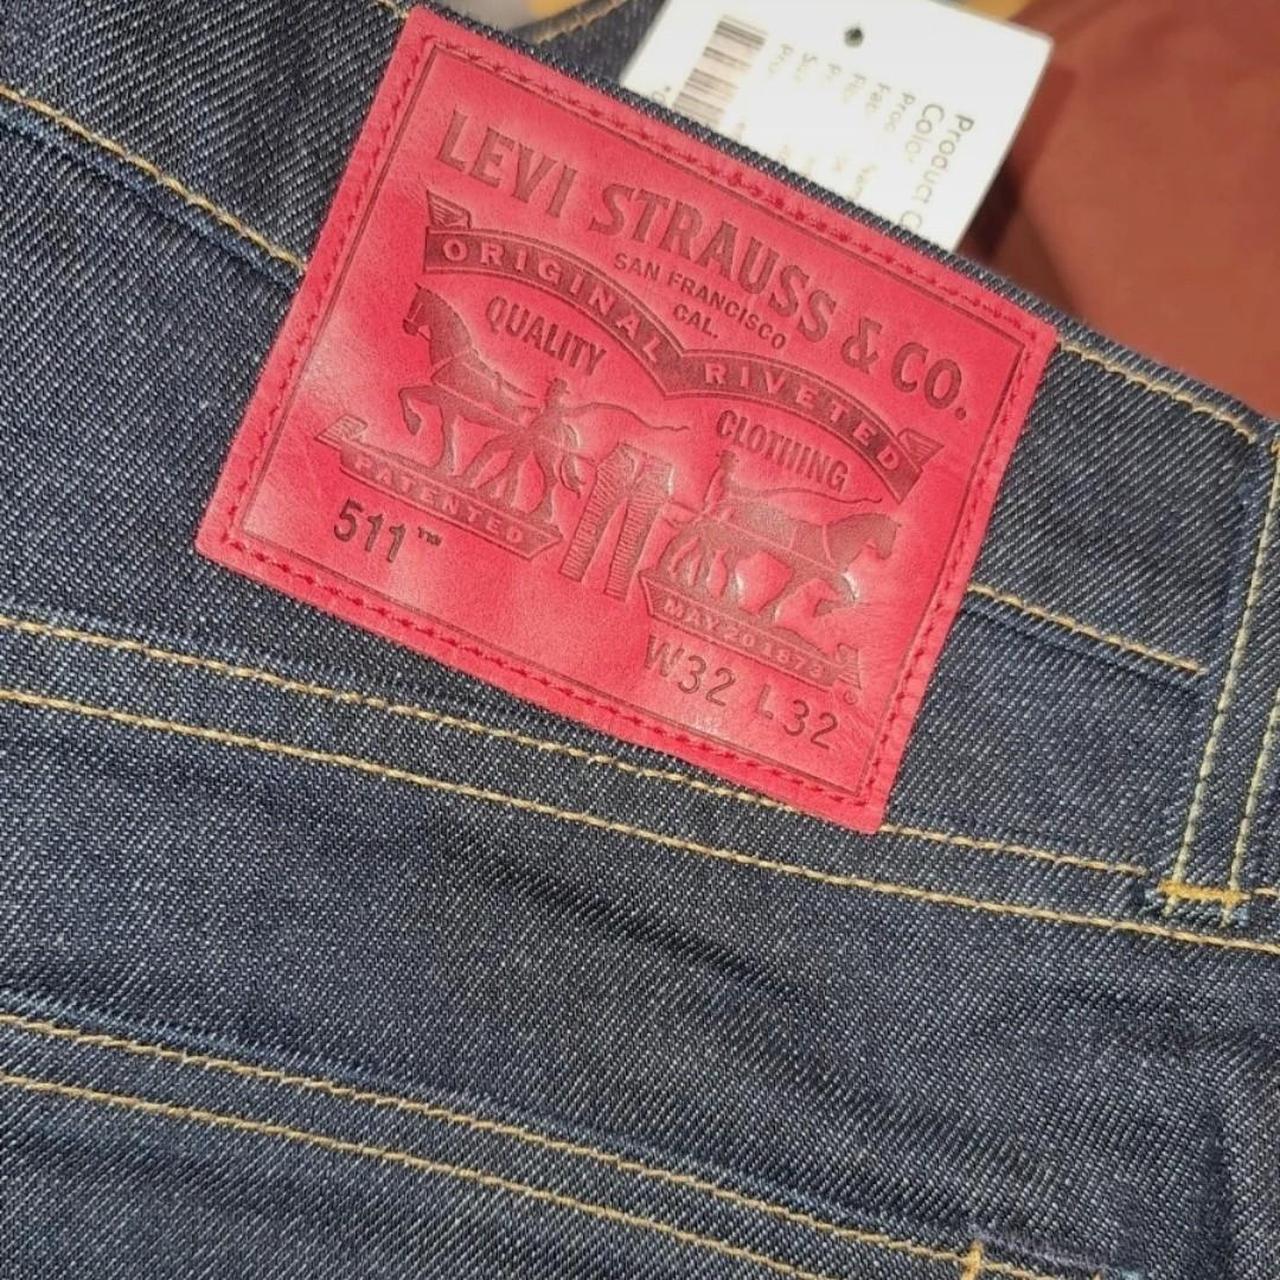 Levi's Men's Navy and Red Jeans | Depop